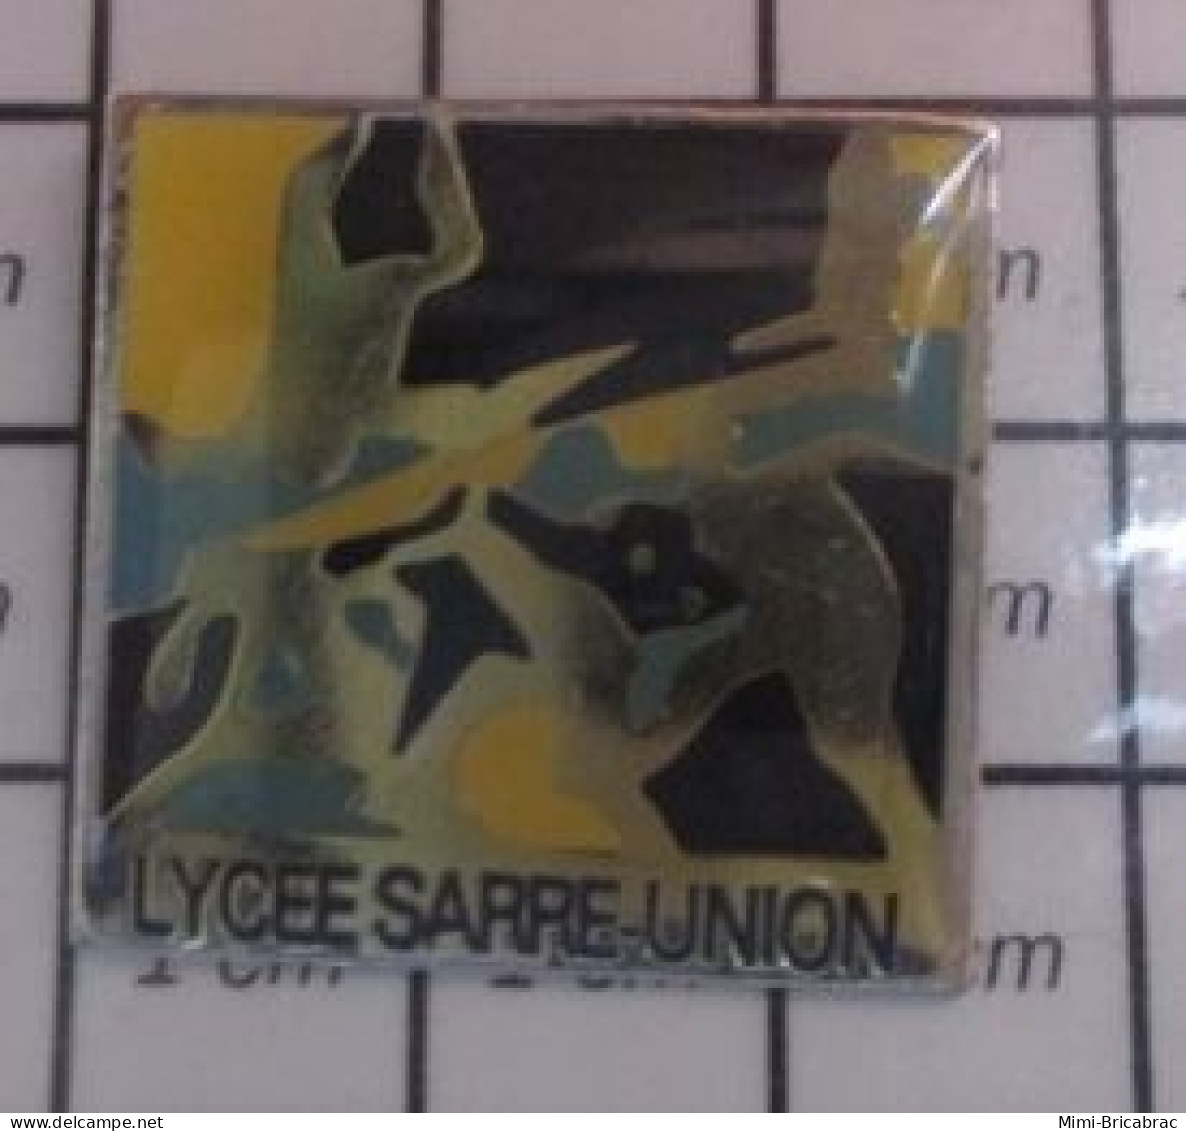 713c Pin's Pins / Beau Et Rare / ADMINISTRATIONS / LYCEE SARRE UNION - Administrations